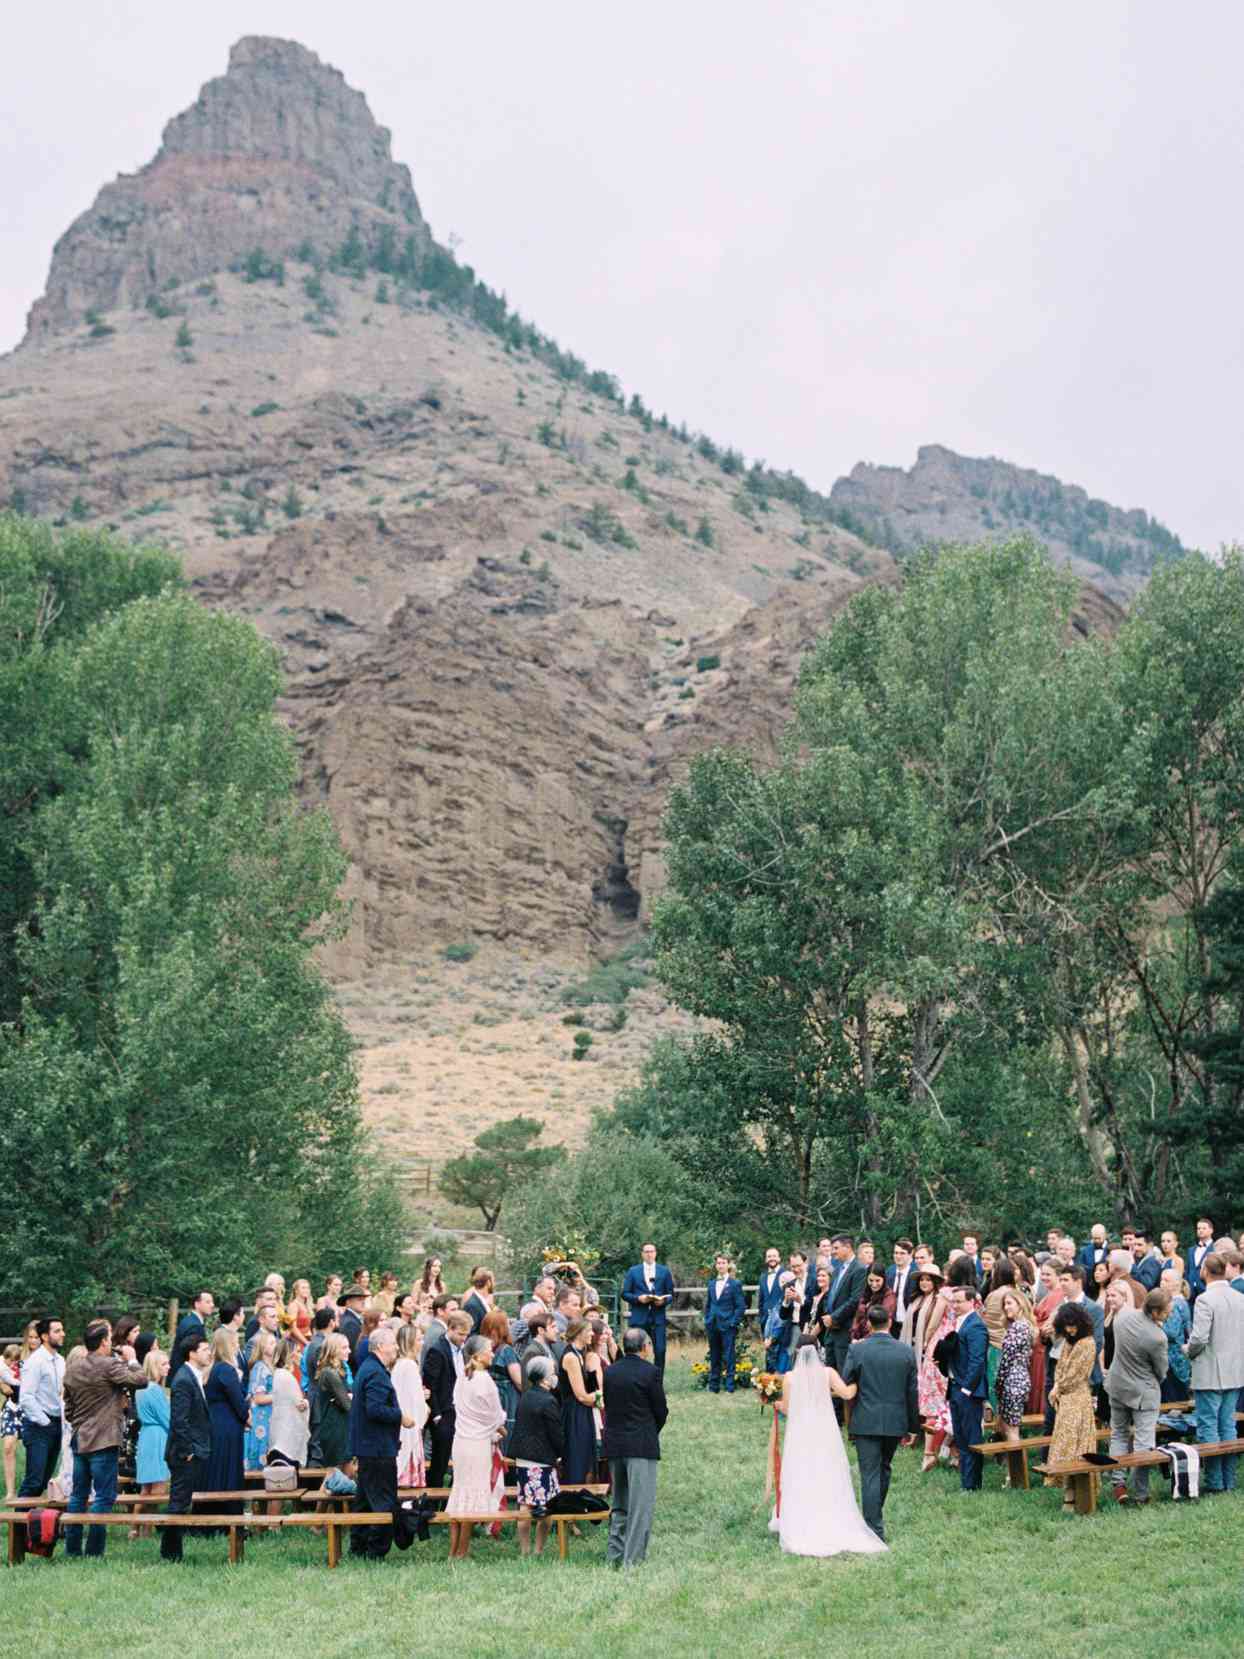 outdoor wedding ceremony set up in the mountains